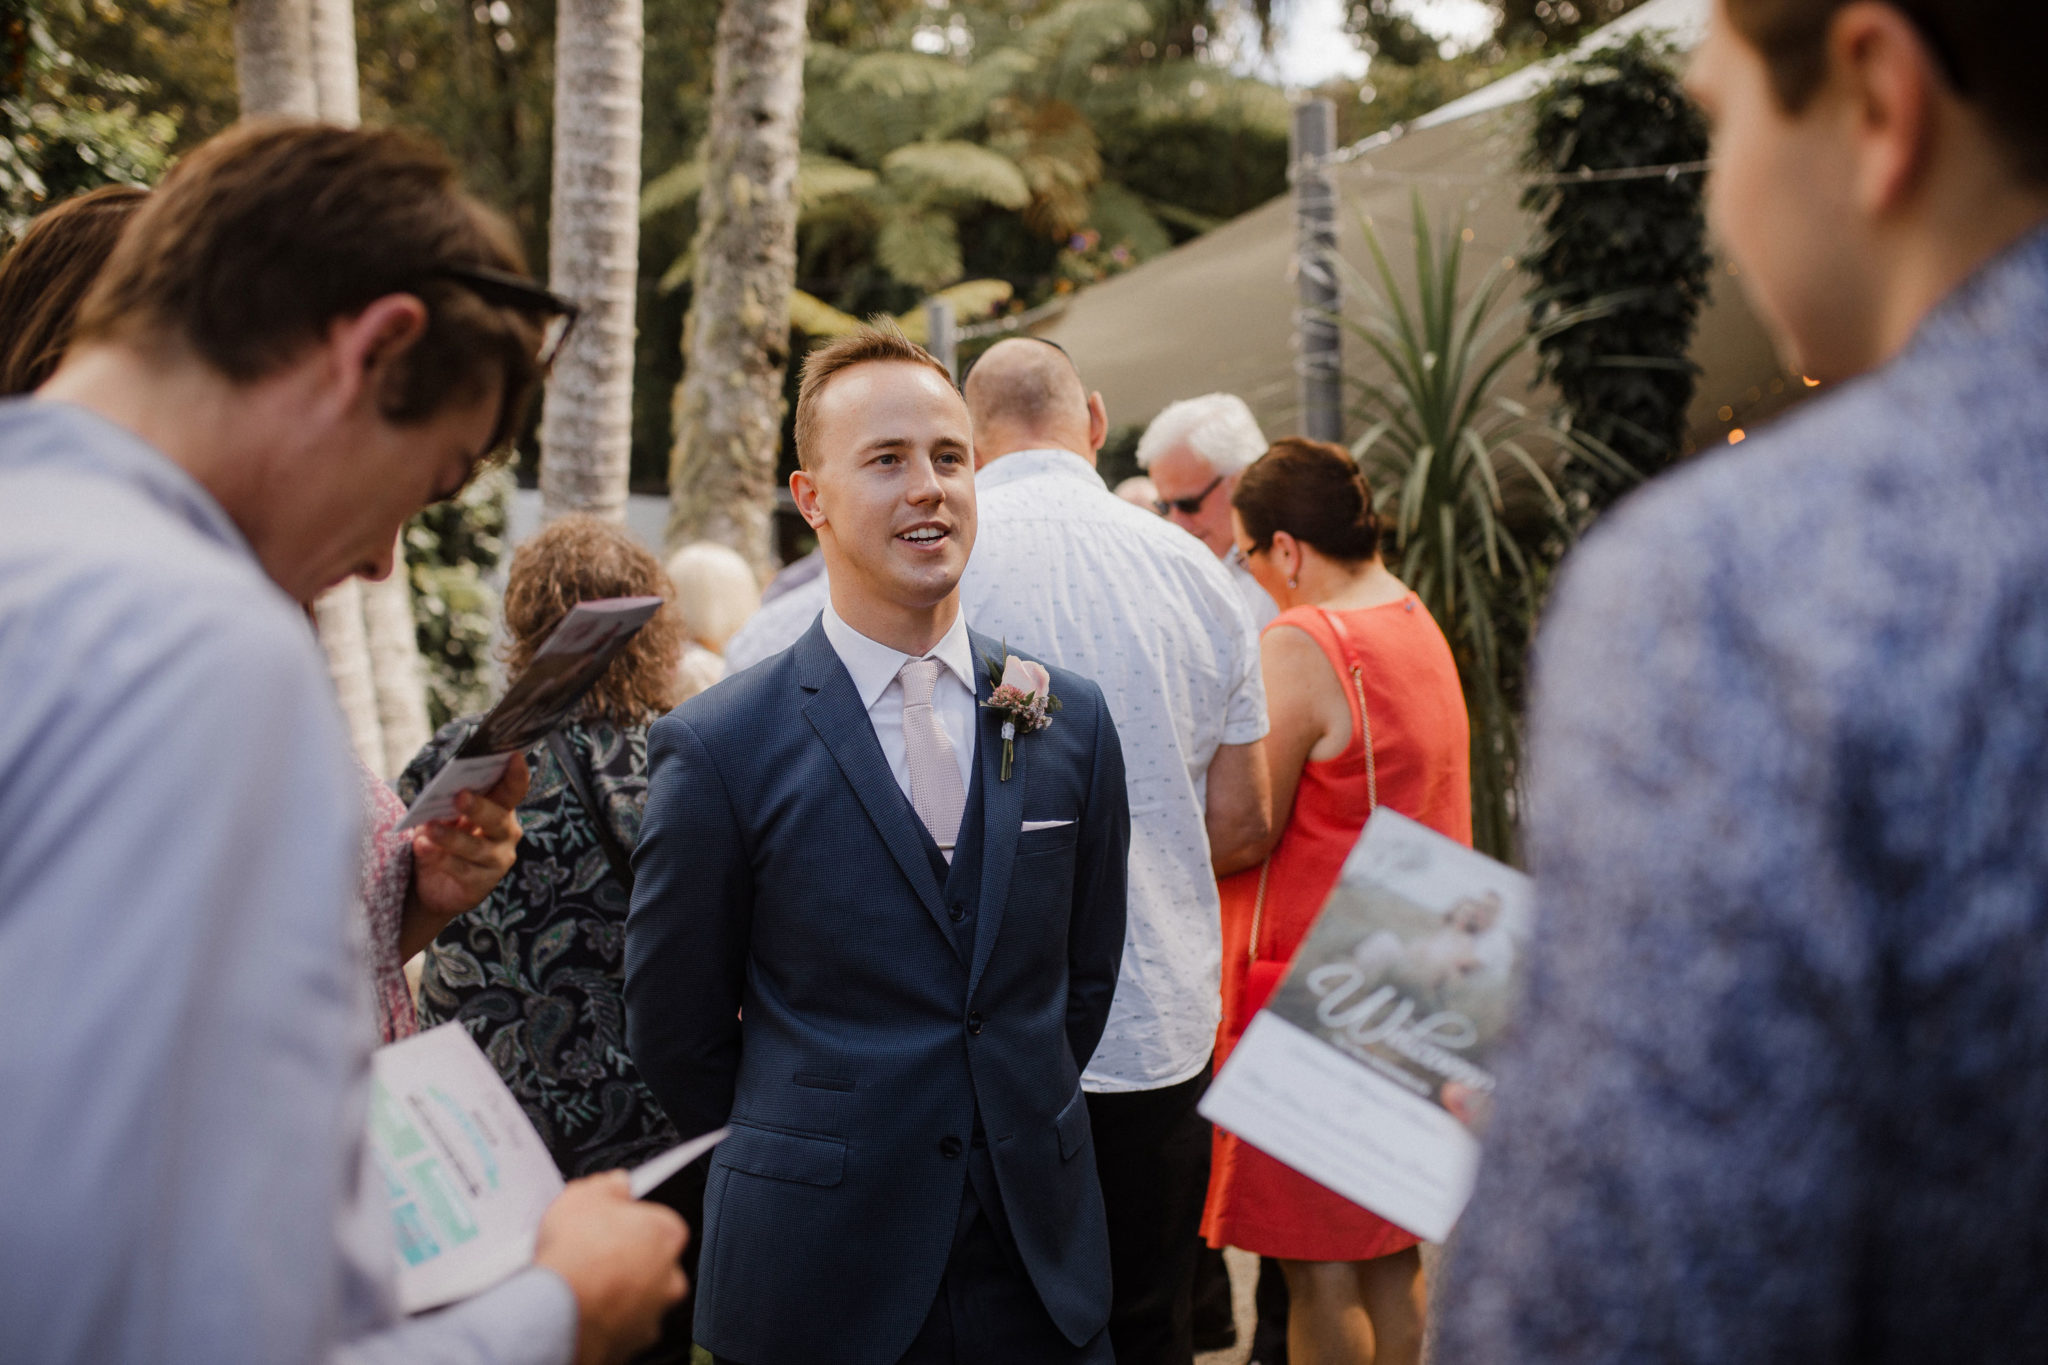 groom mingling with guests